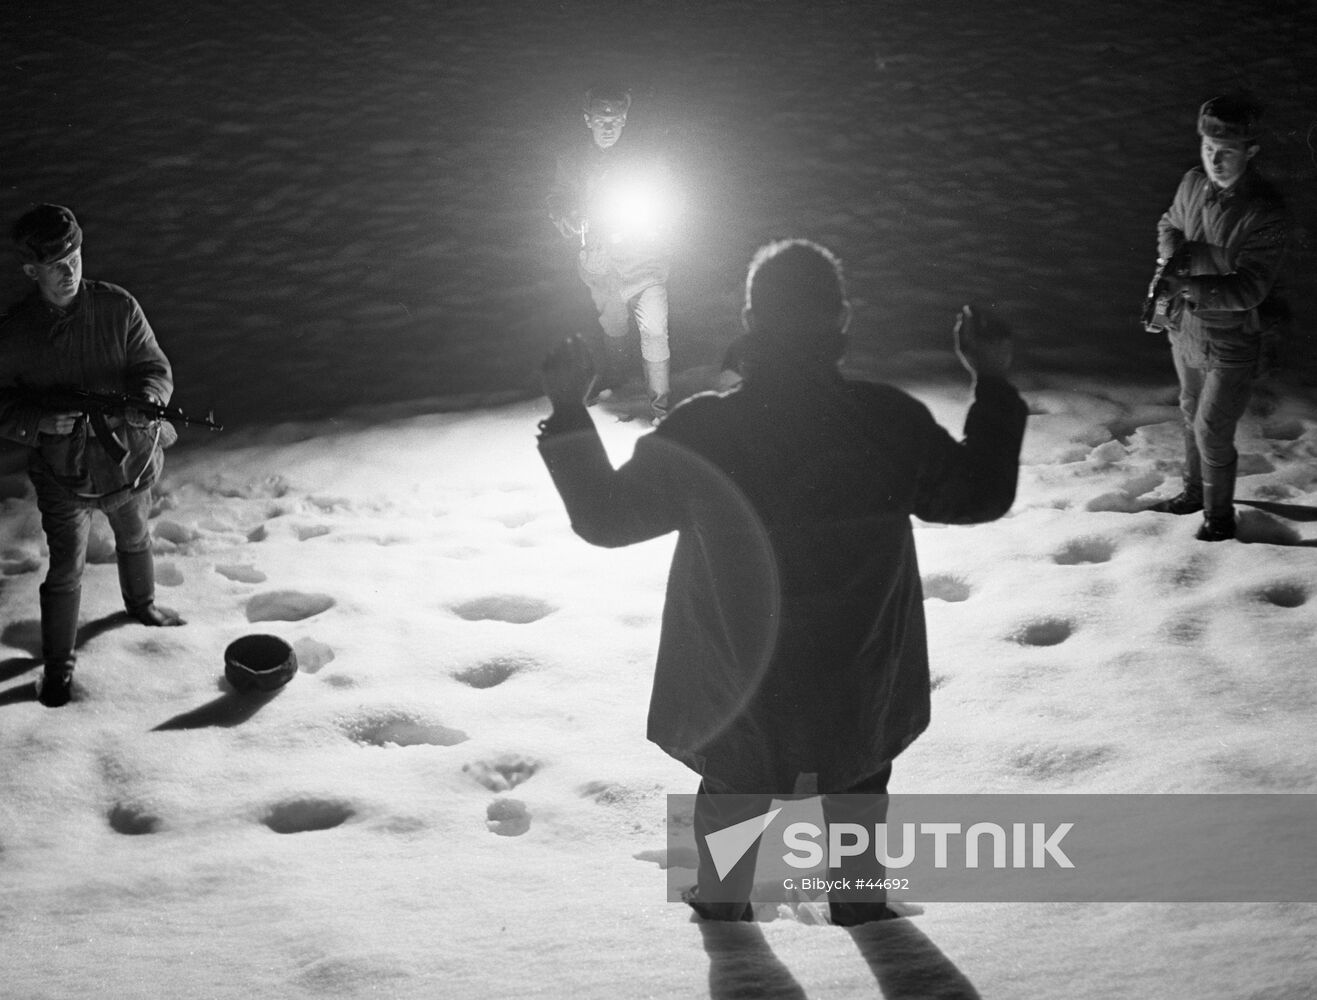 BORDER GUARDS DETAINMENT EXERCISE NIGHT SNOW